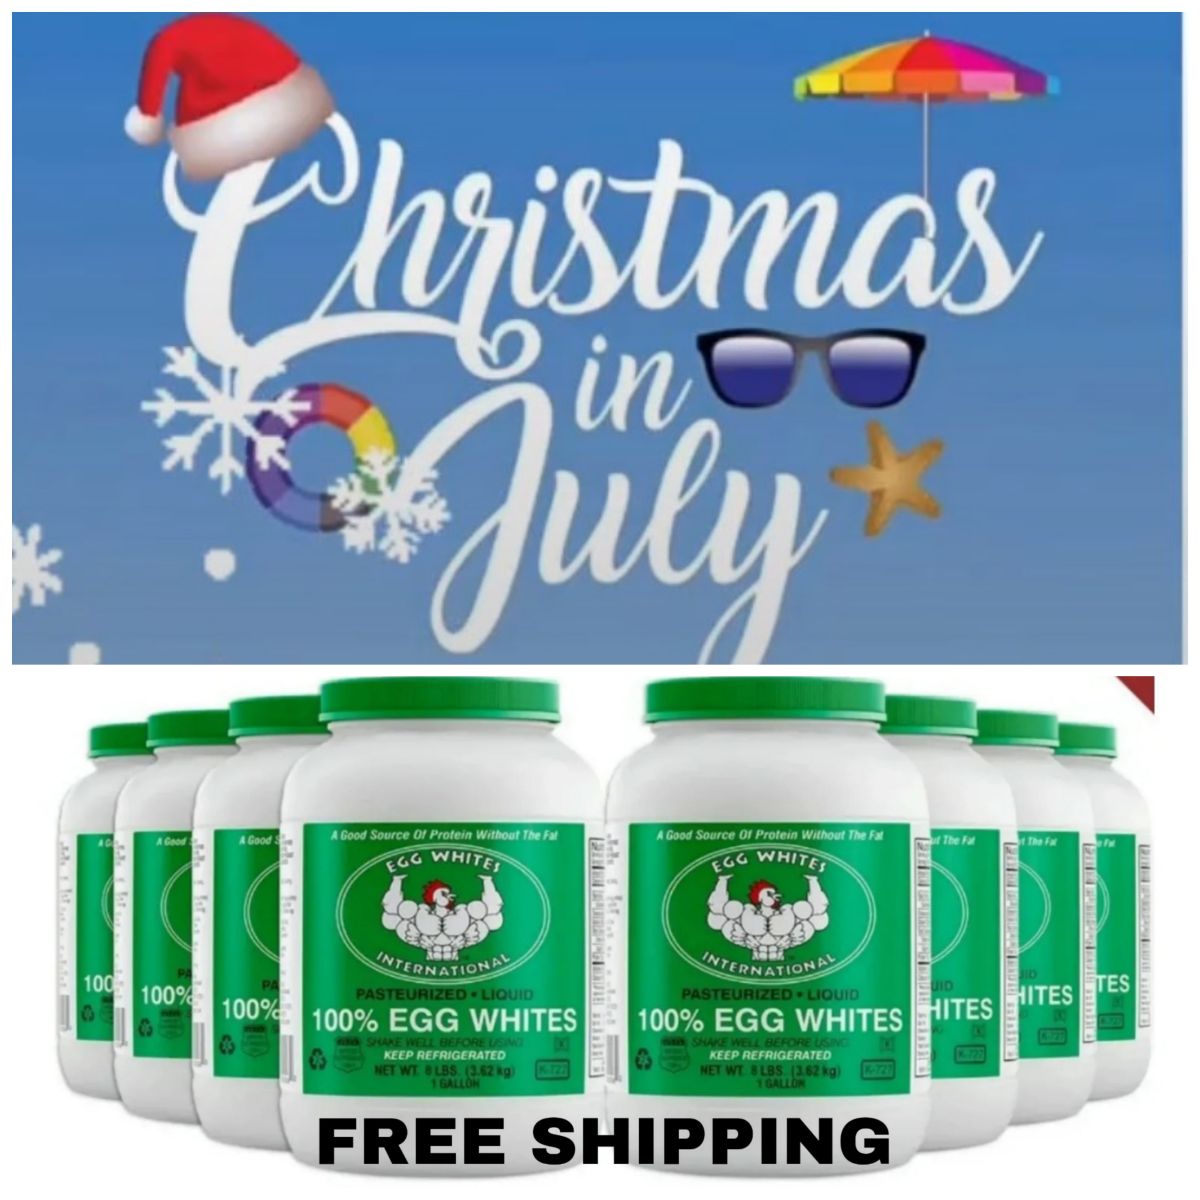 SAVE $35 on 4 gallons with Christmas in July